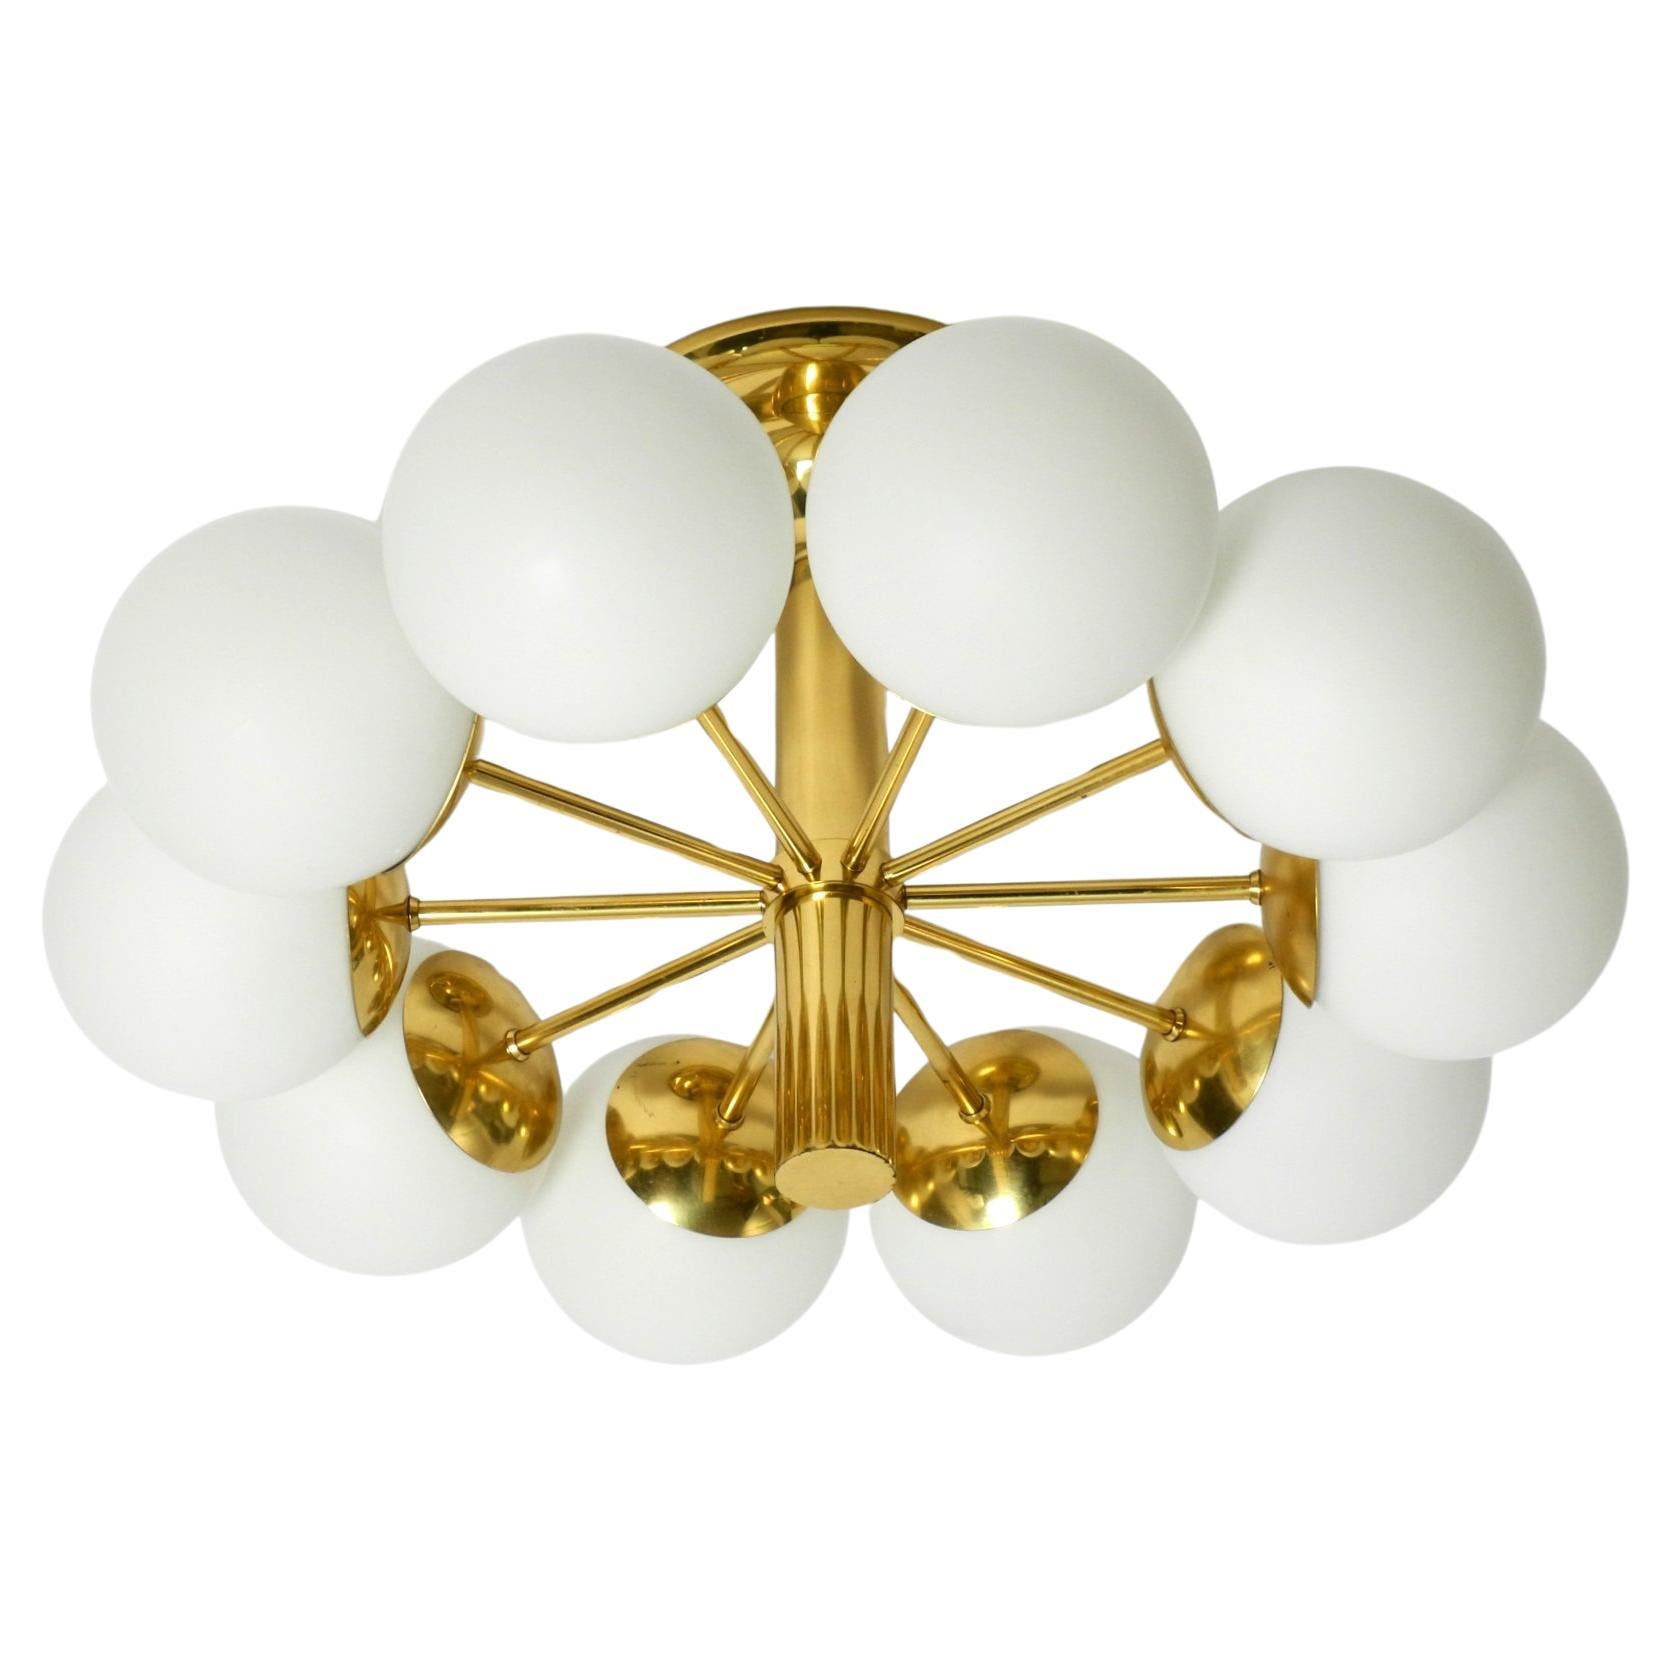 1960s Space Age brass ceiling lamp with 10 glass balls by Kaiser Leuchten